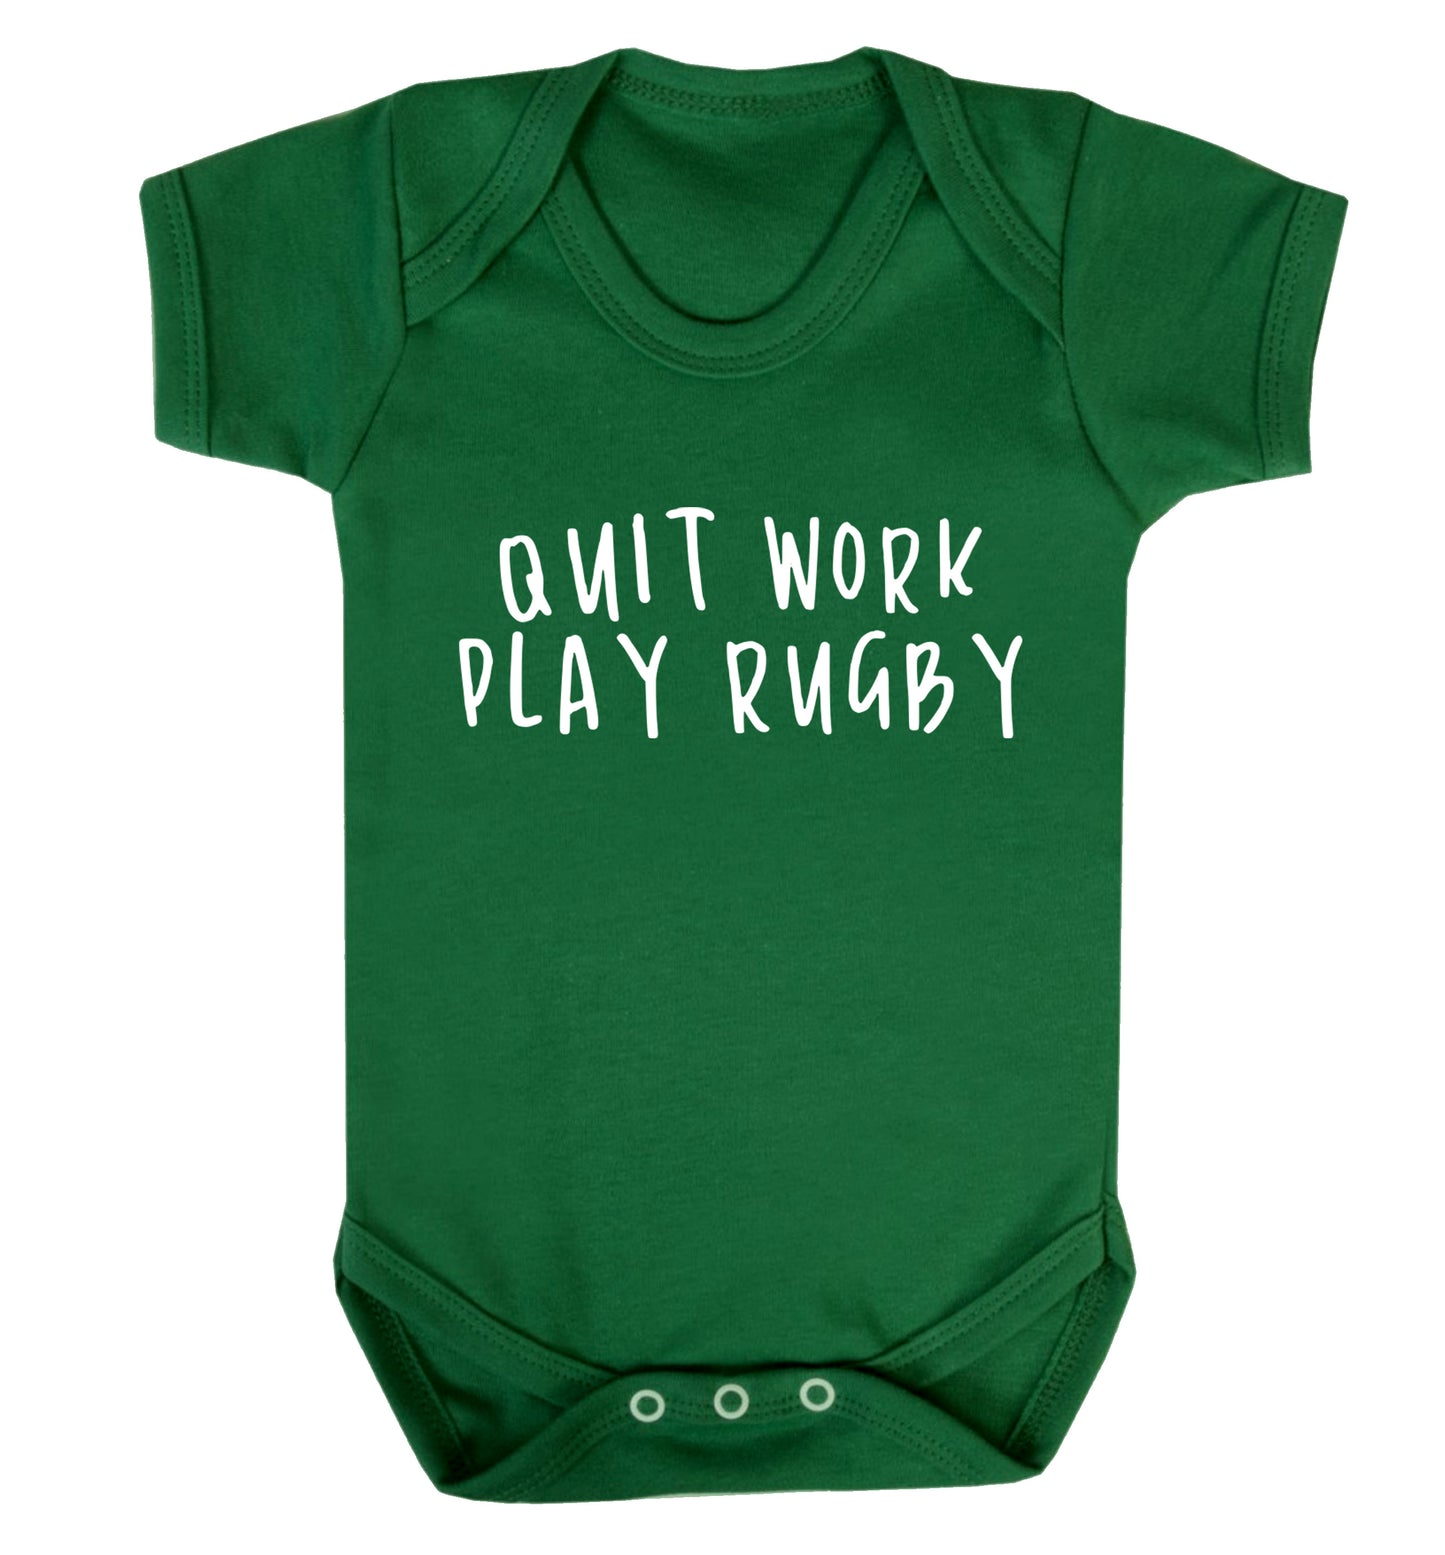 Quit work play rugby Baby Vest green 18-24 months